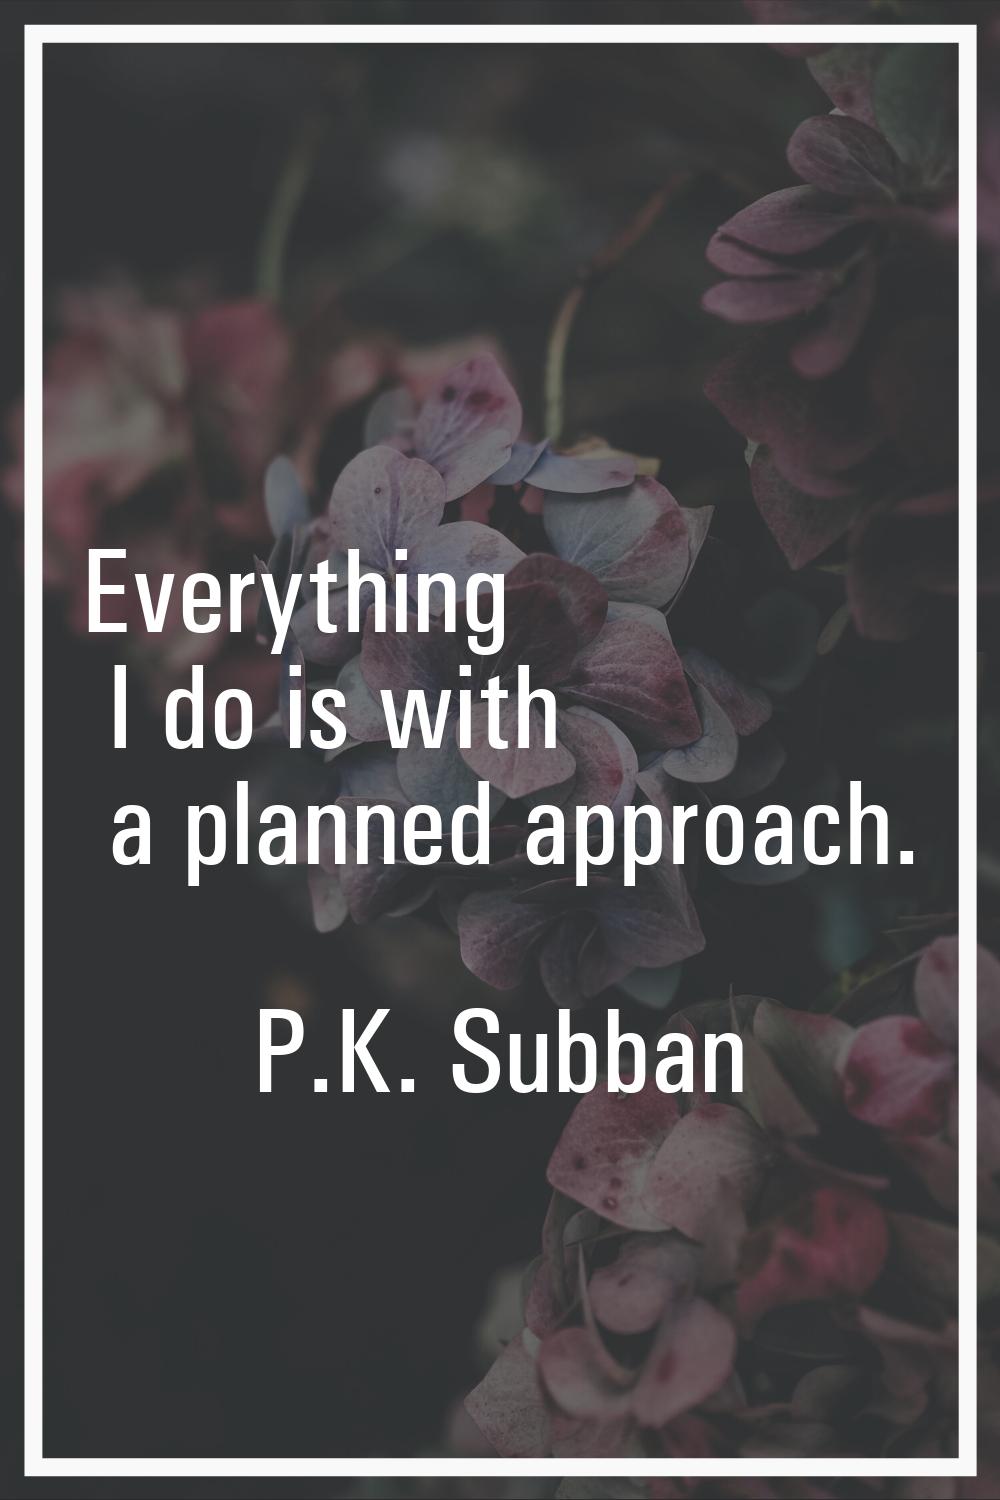 Everything I do is with a planned approach.